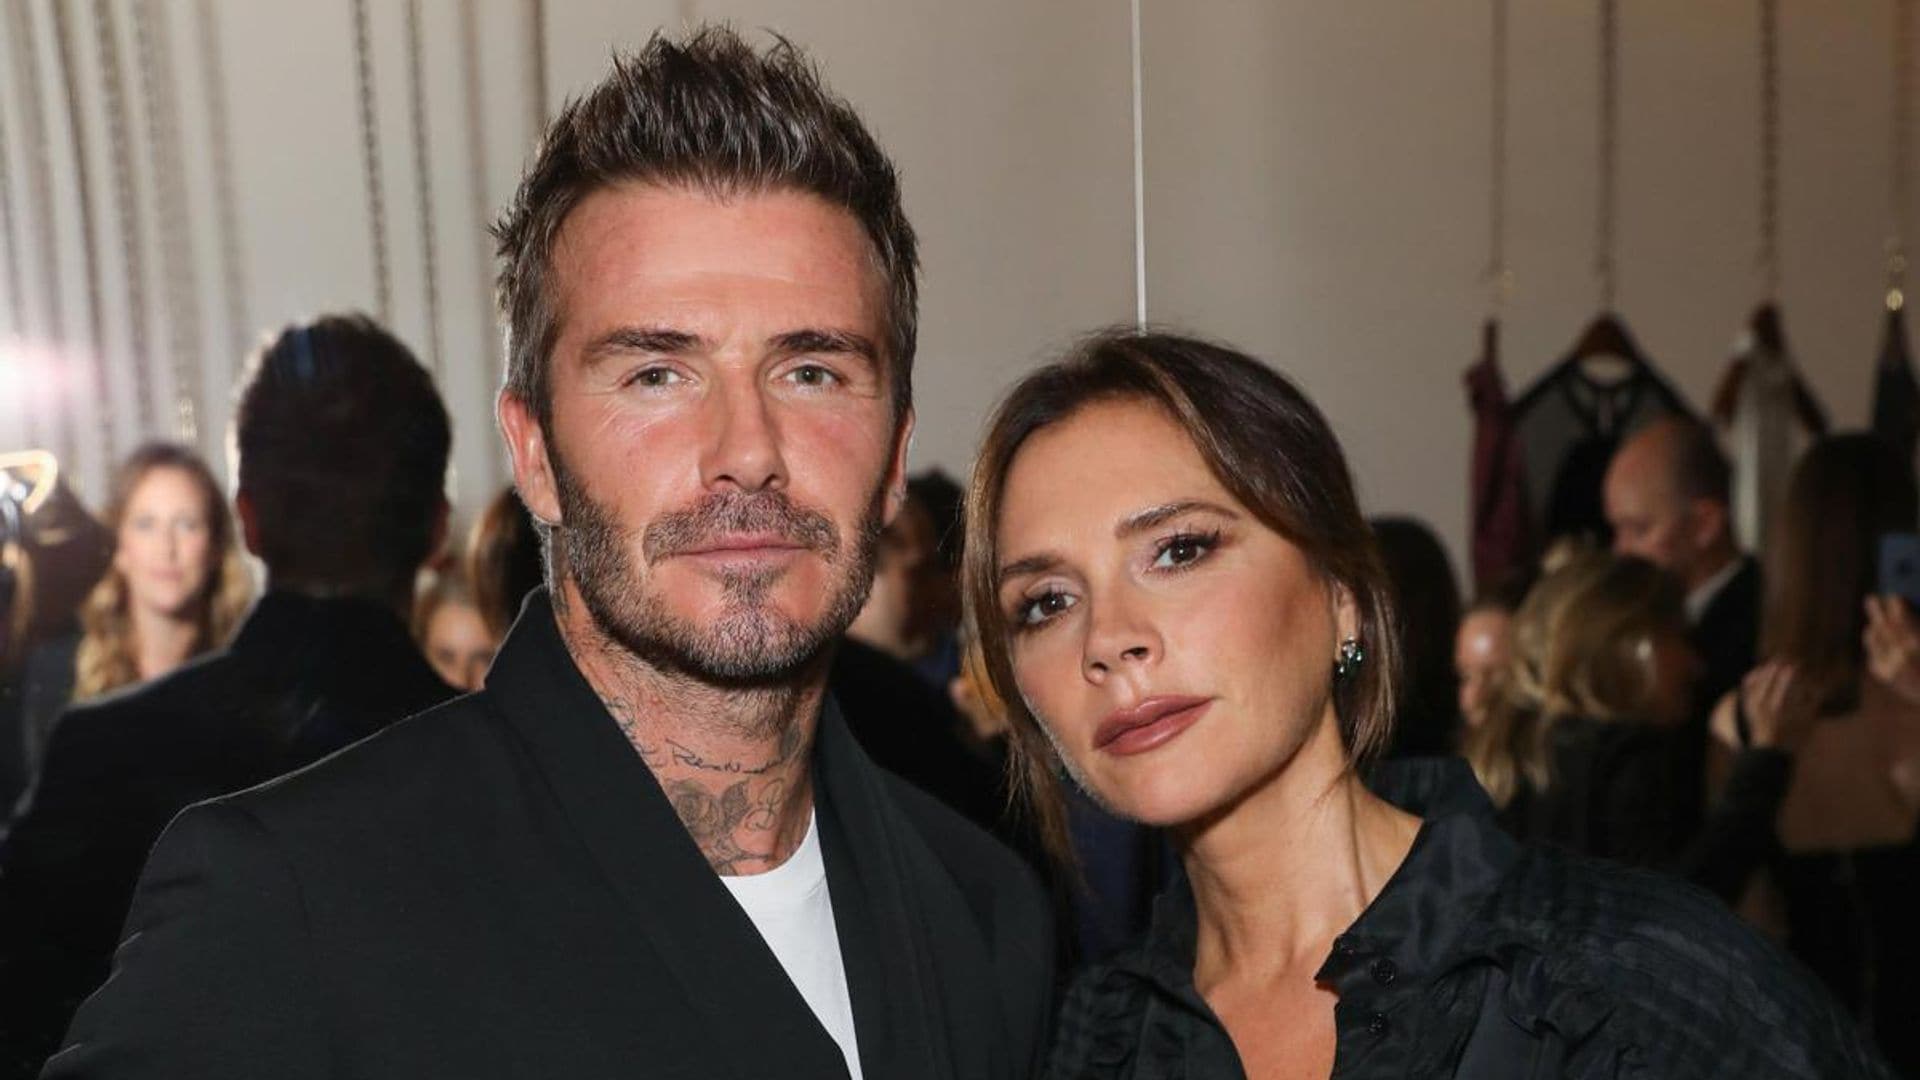 Victoria Beckham and Sotheby's celebration of Andy Warhol with Don Julio 1942